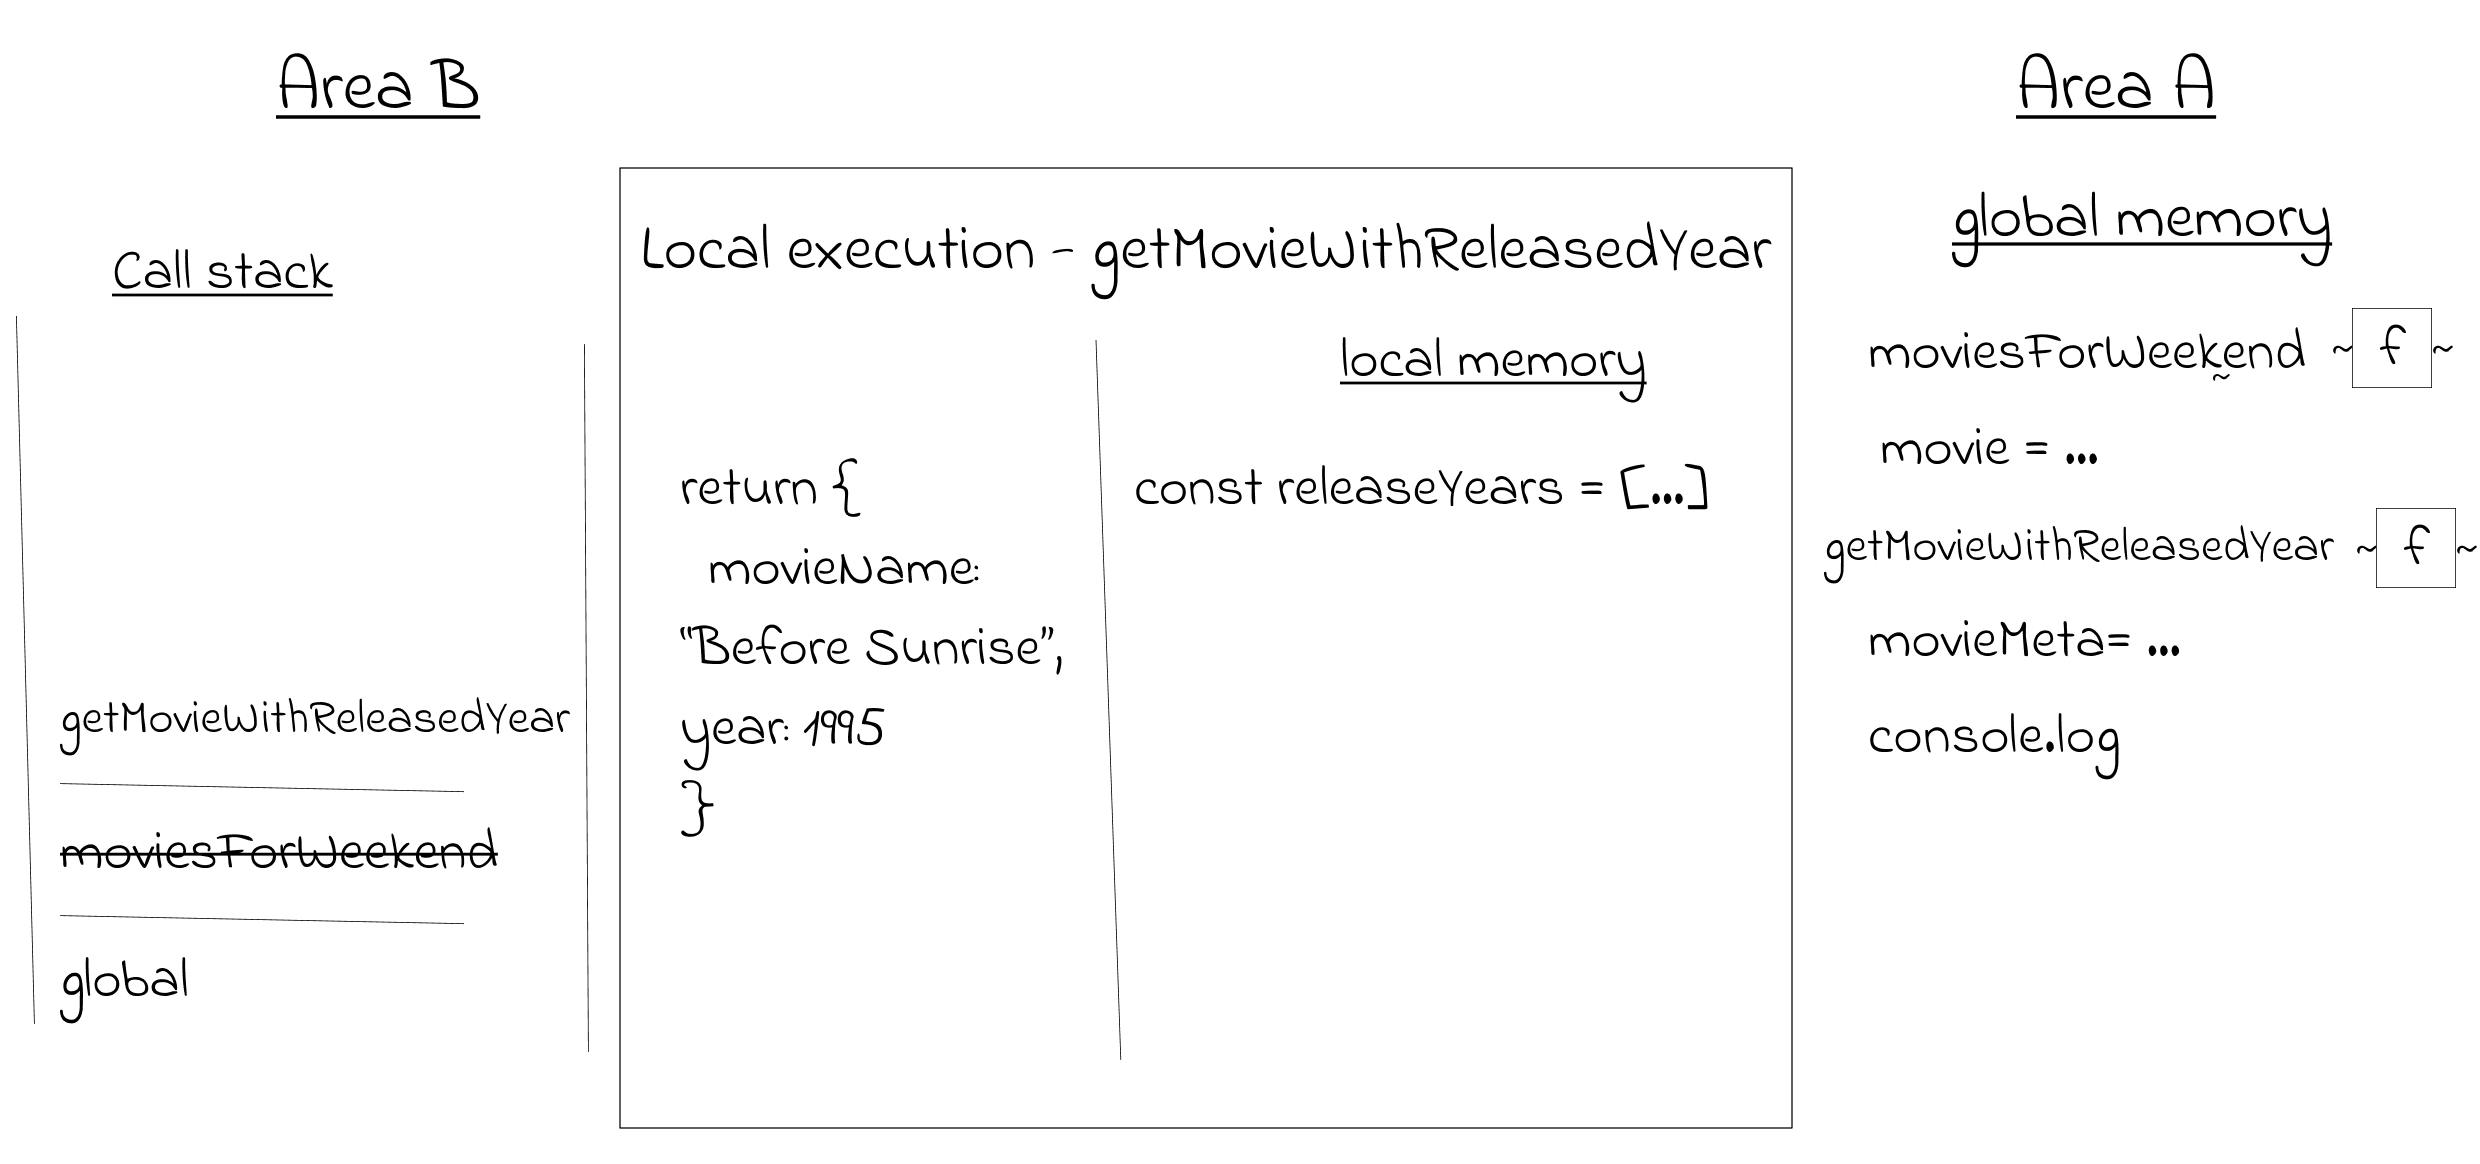 A diagram depicts execution context for getMovieWithReleasedYear closure function